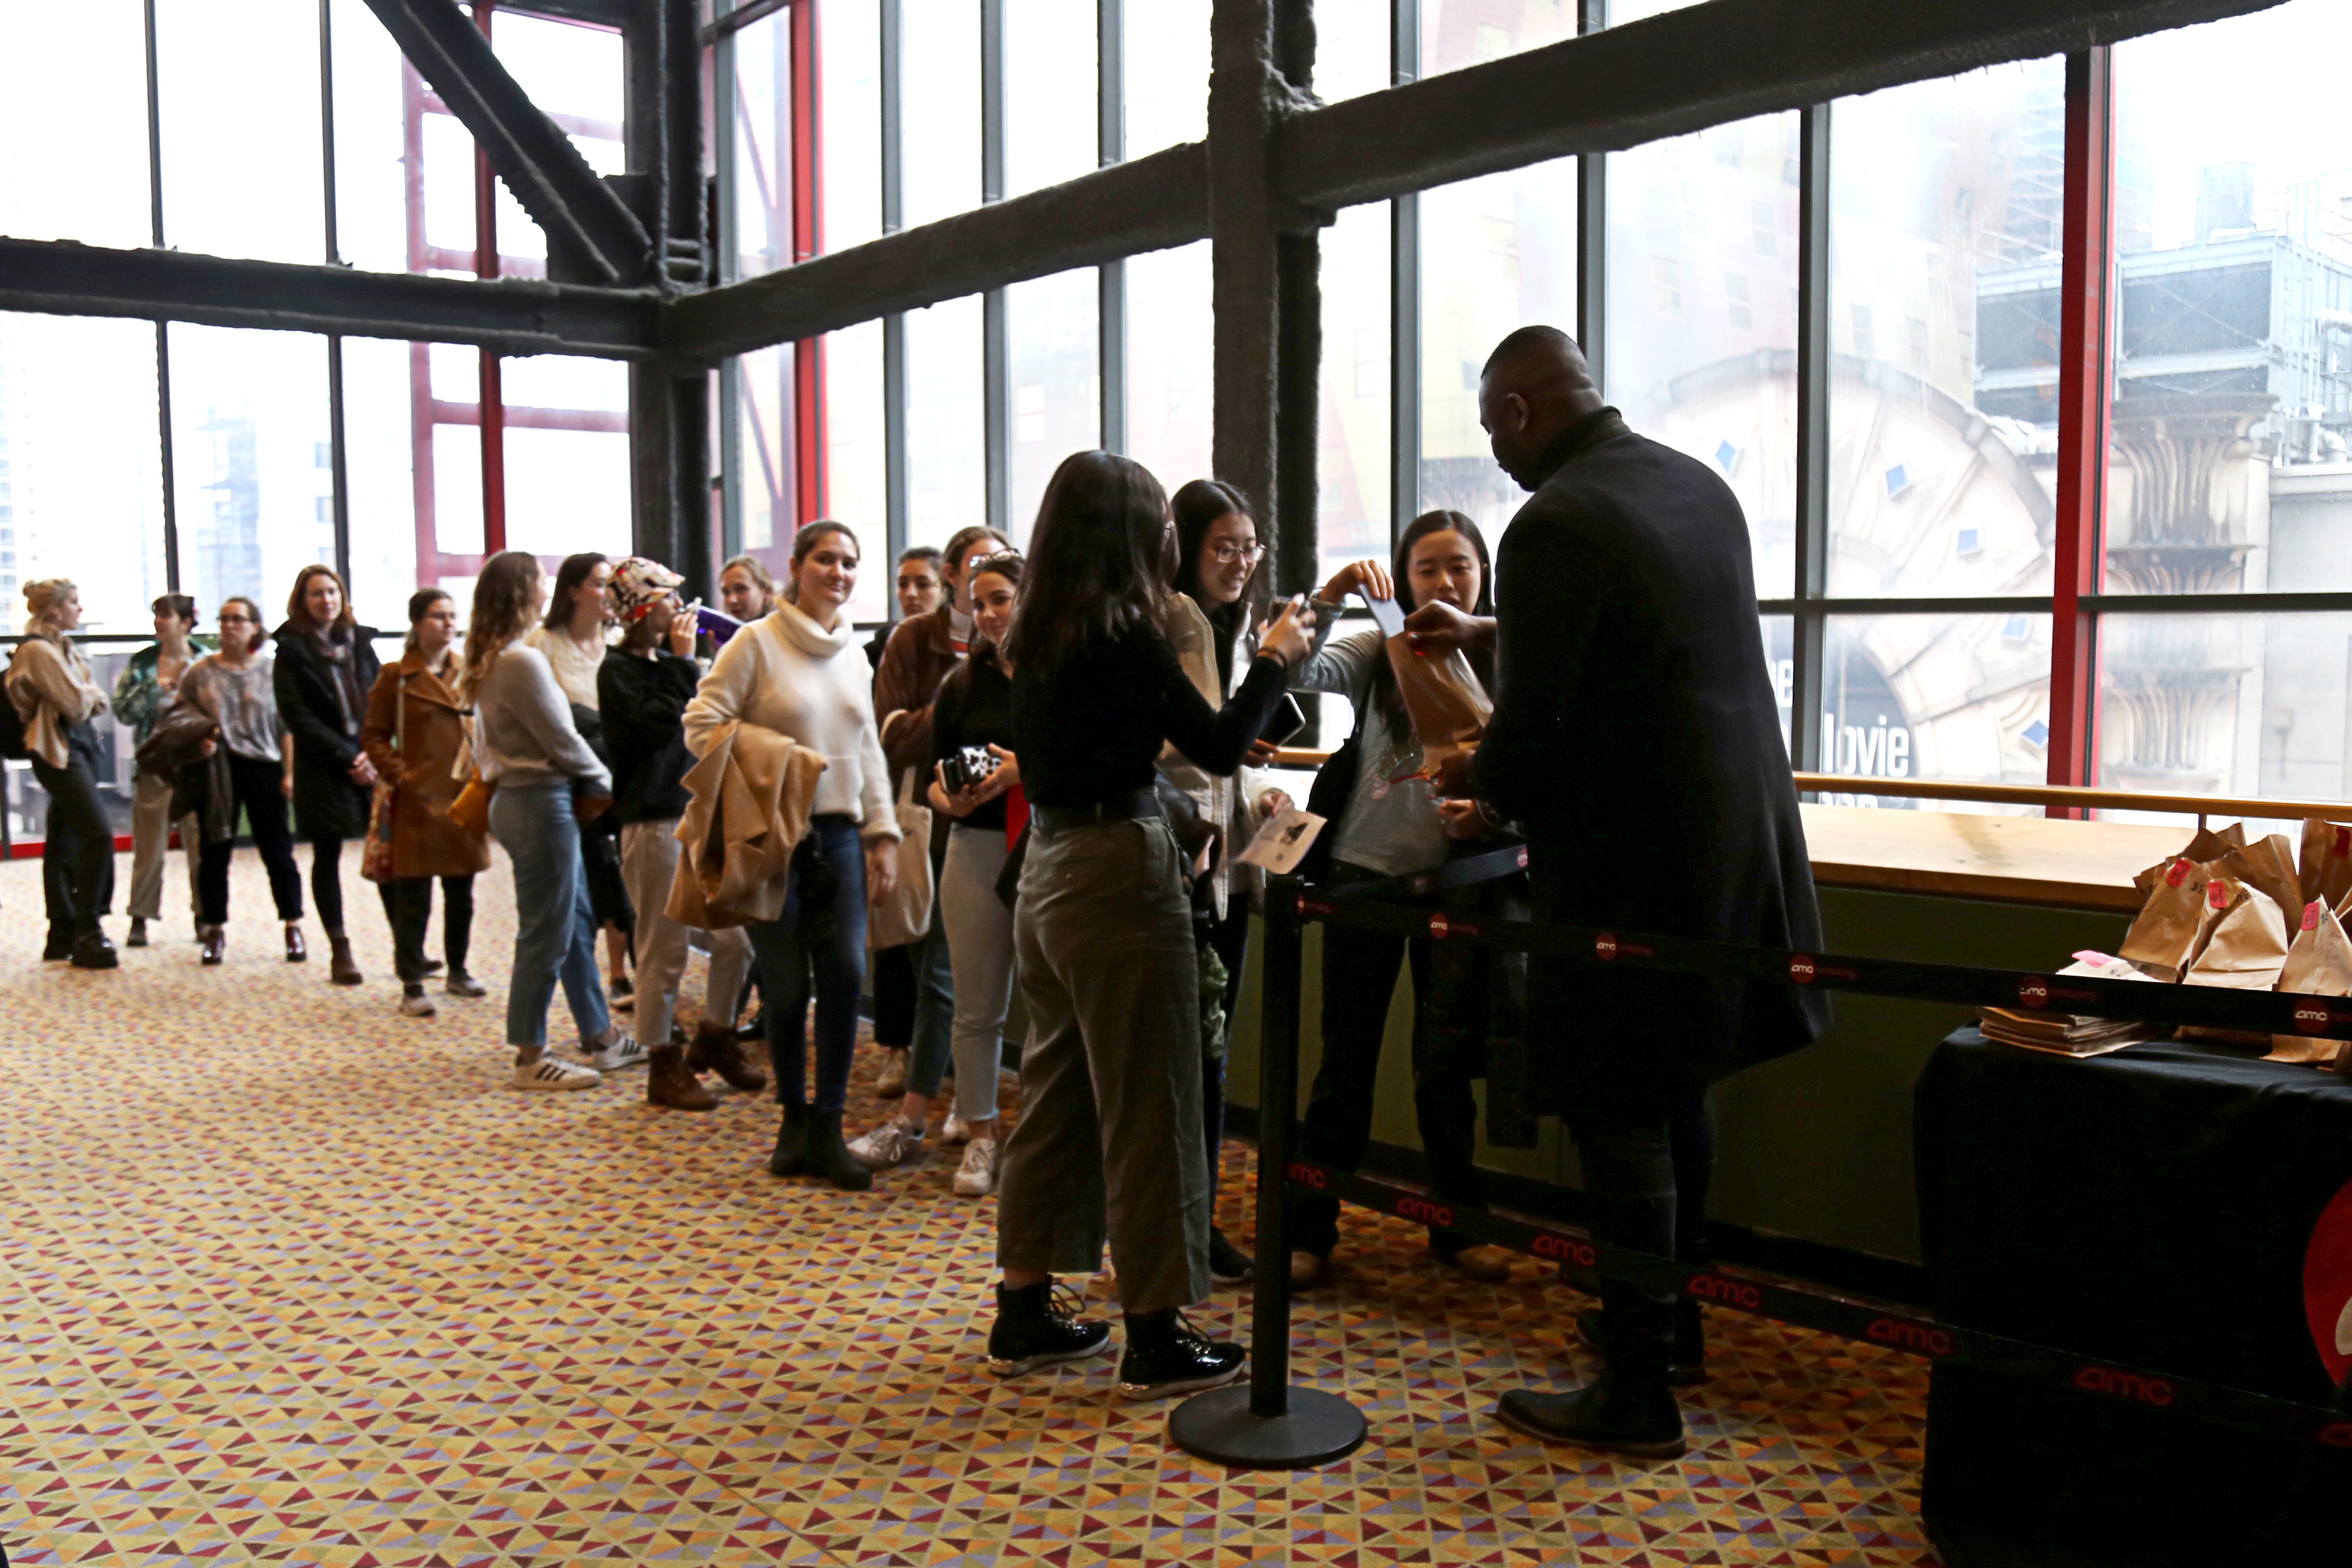 Students line up to screen "Little Women."